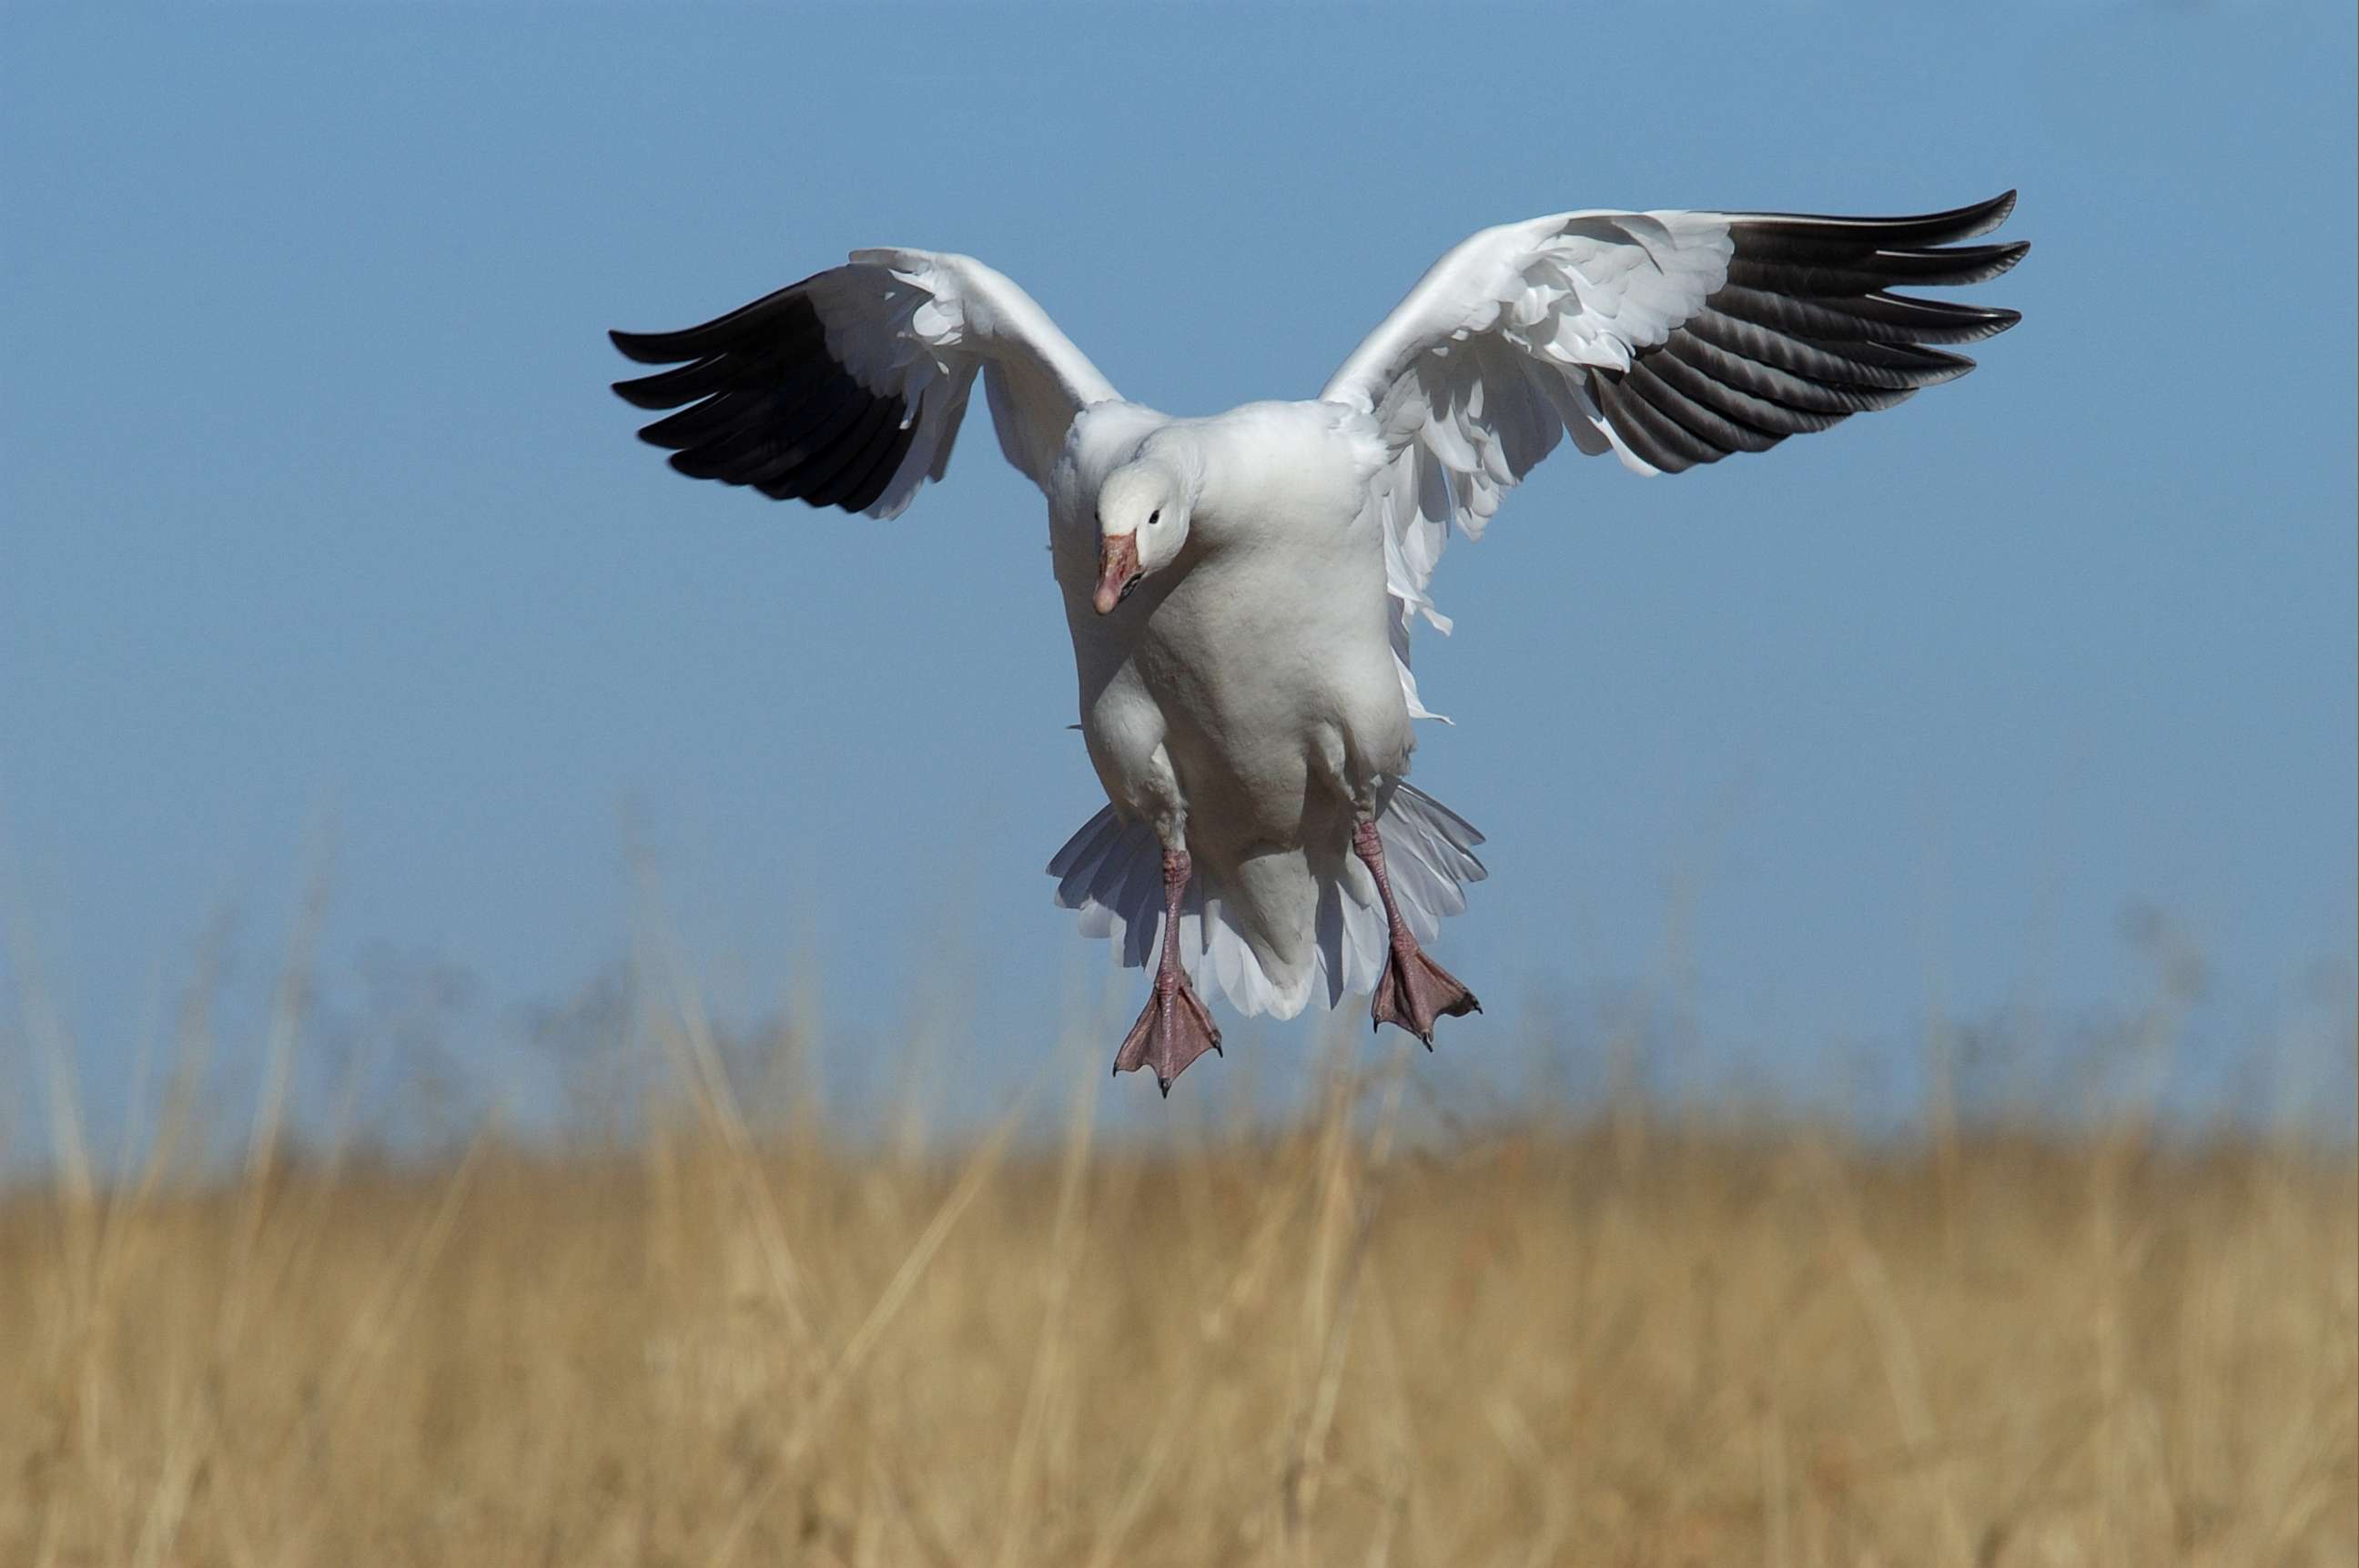 PHOTO: A snow goose lands from flight in Bosque, N.M. in an undated file image.